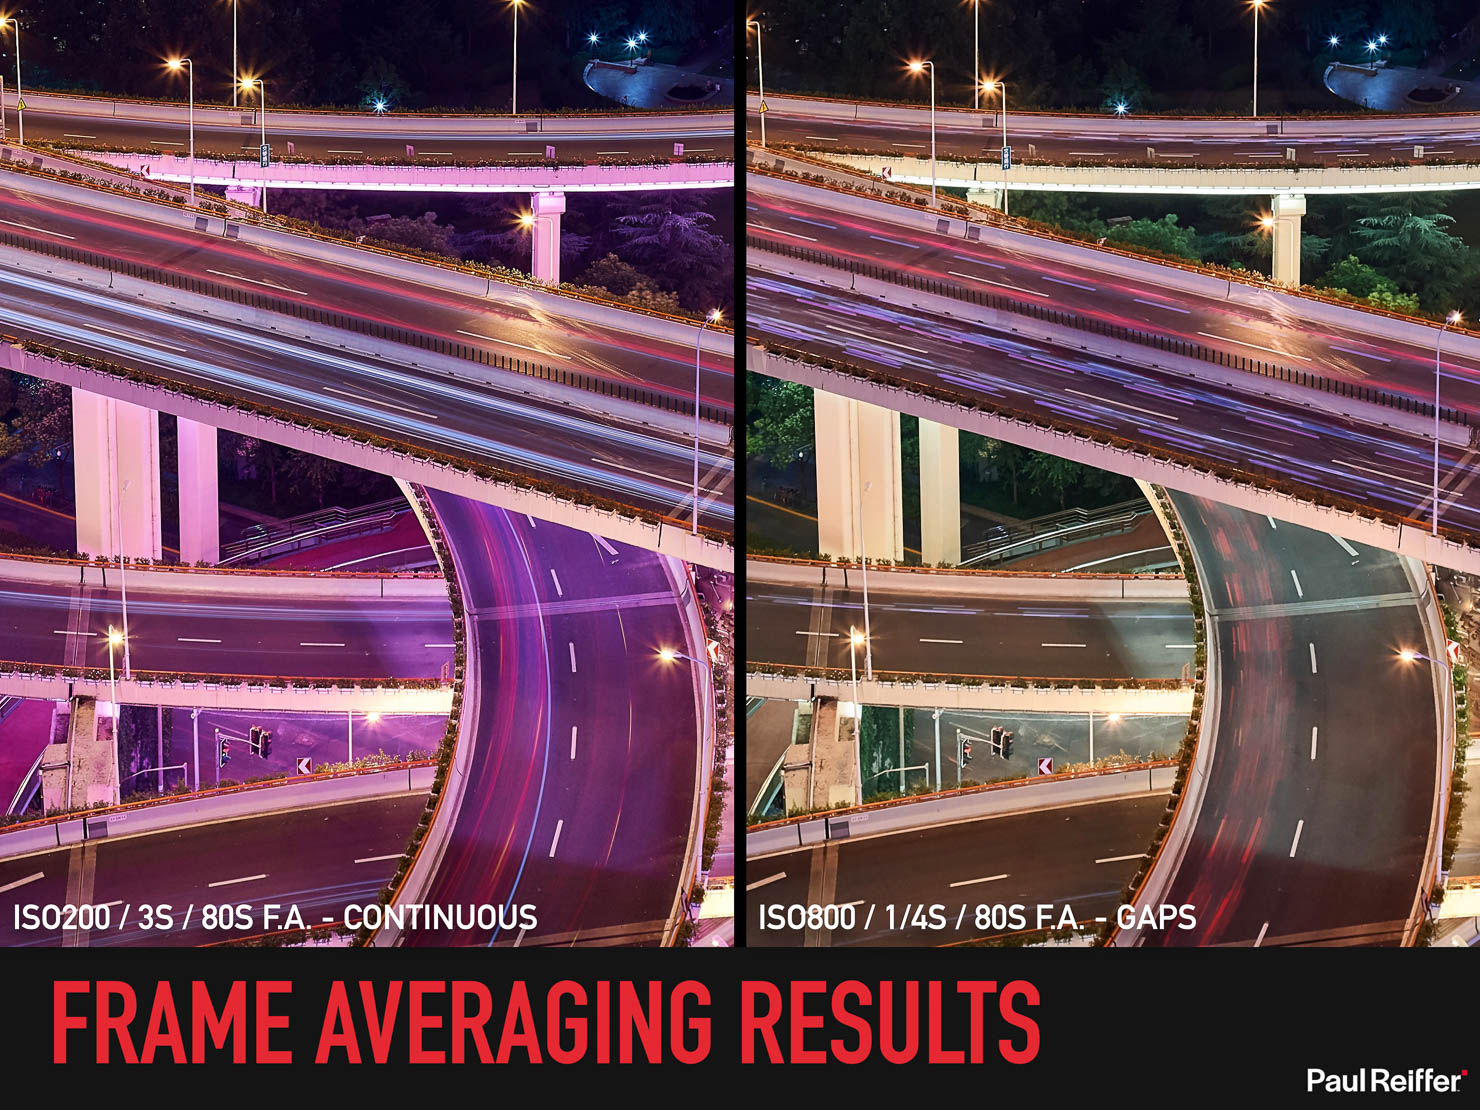 Frame Averaging Complete Guide Paul Reiffer Phase One Presentation Automated Long Exposure Afa How To 043 Gaps Vs Continuous